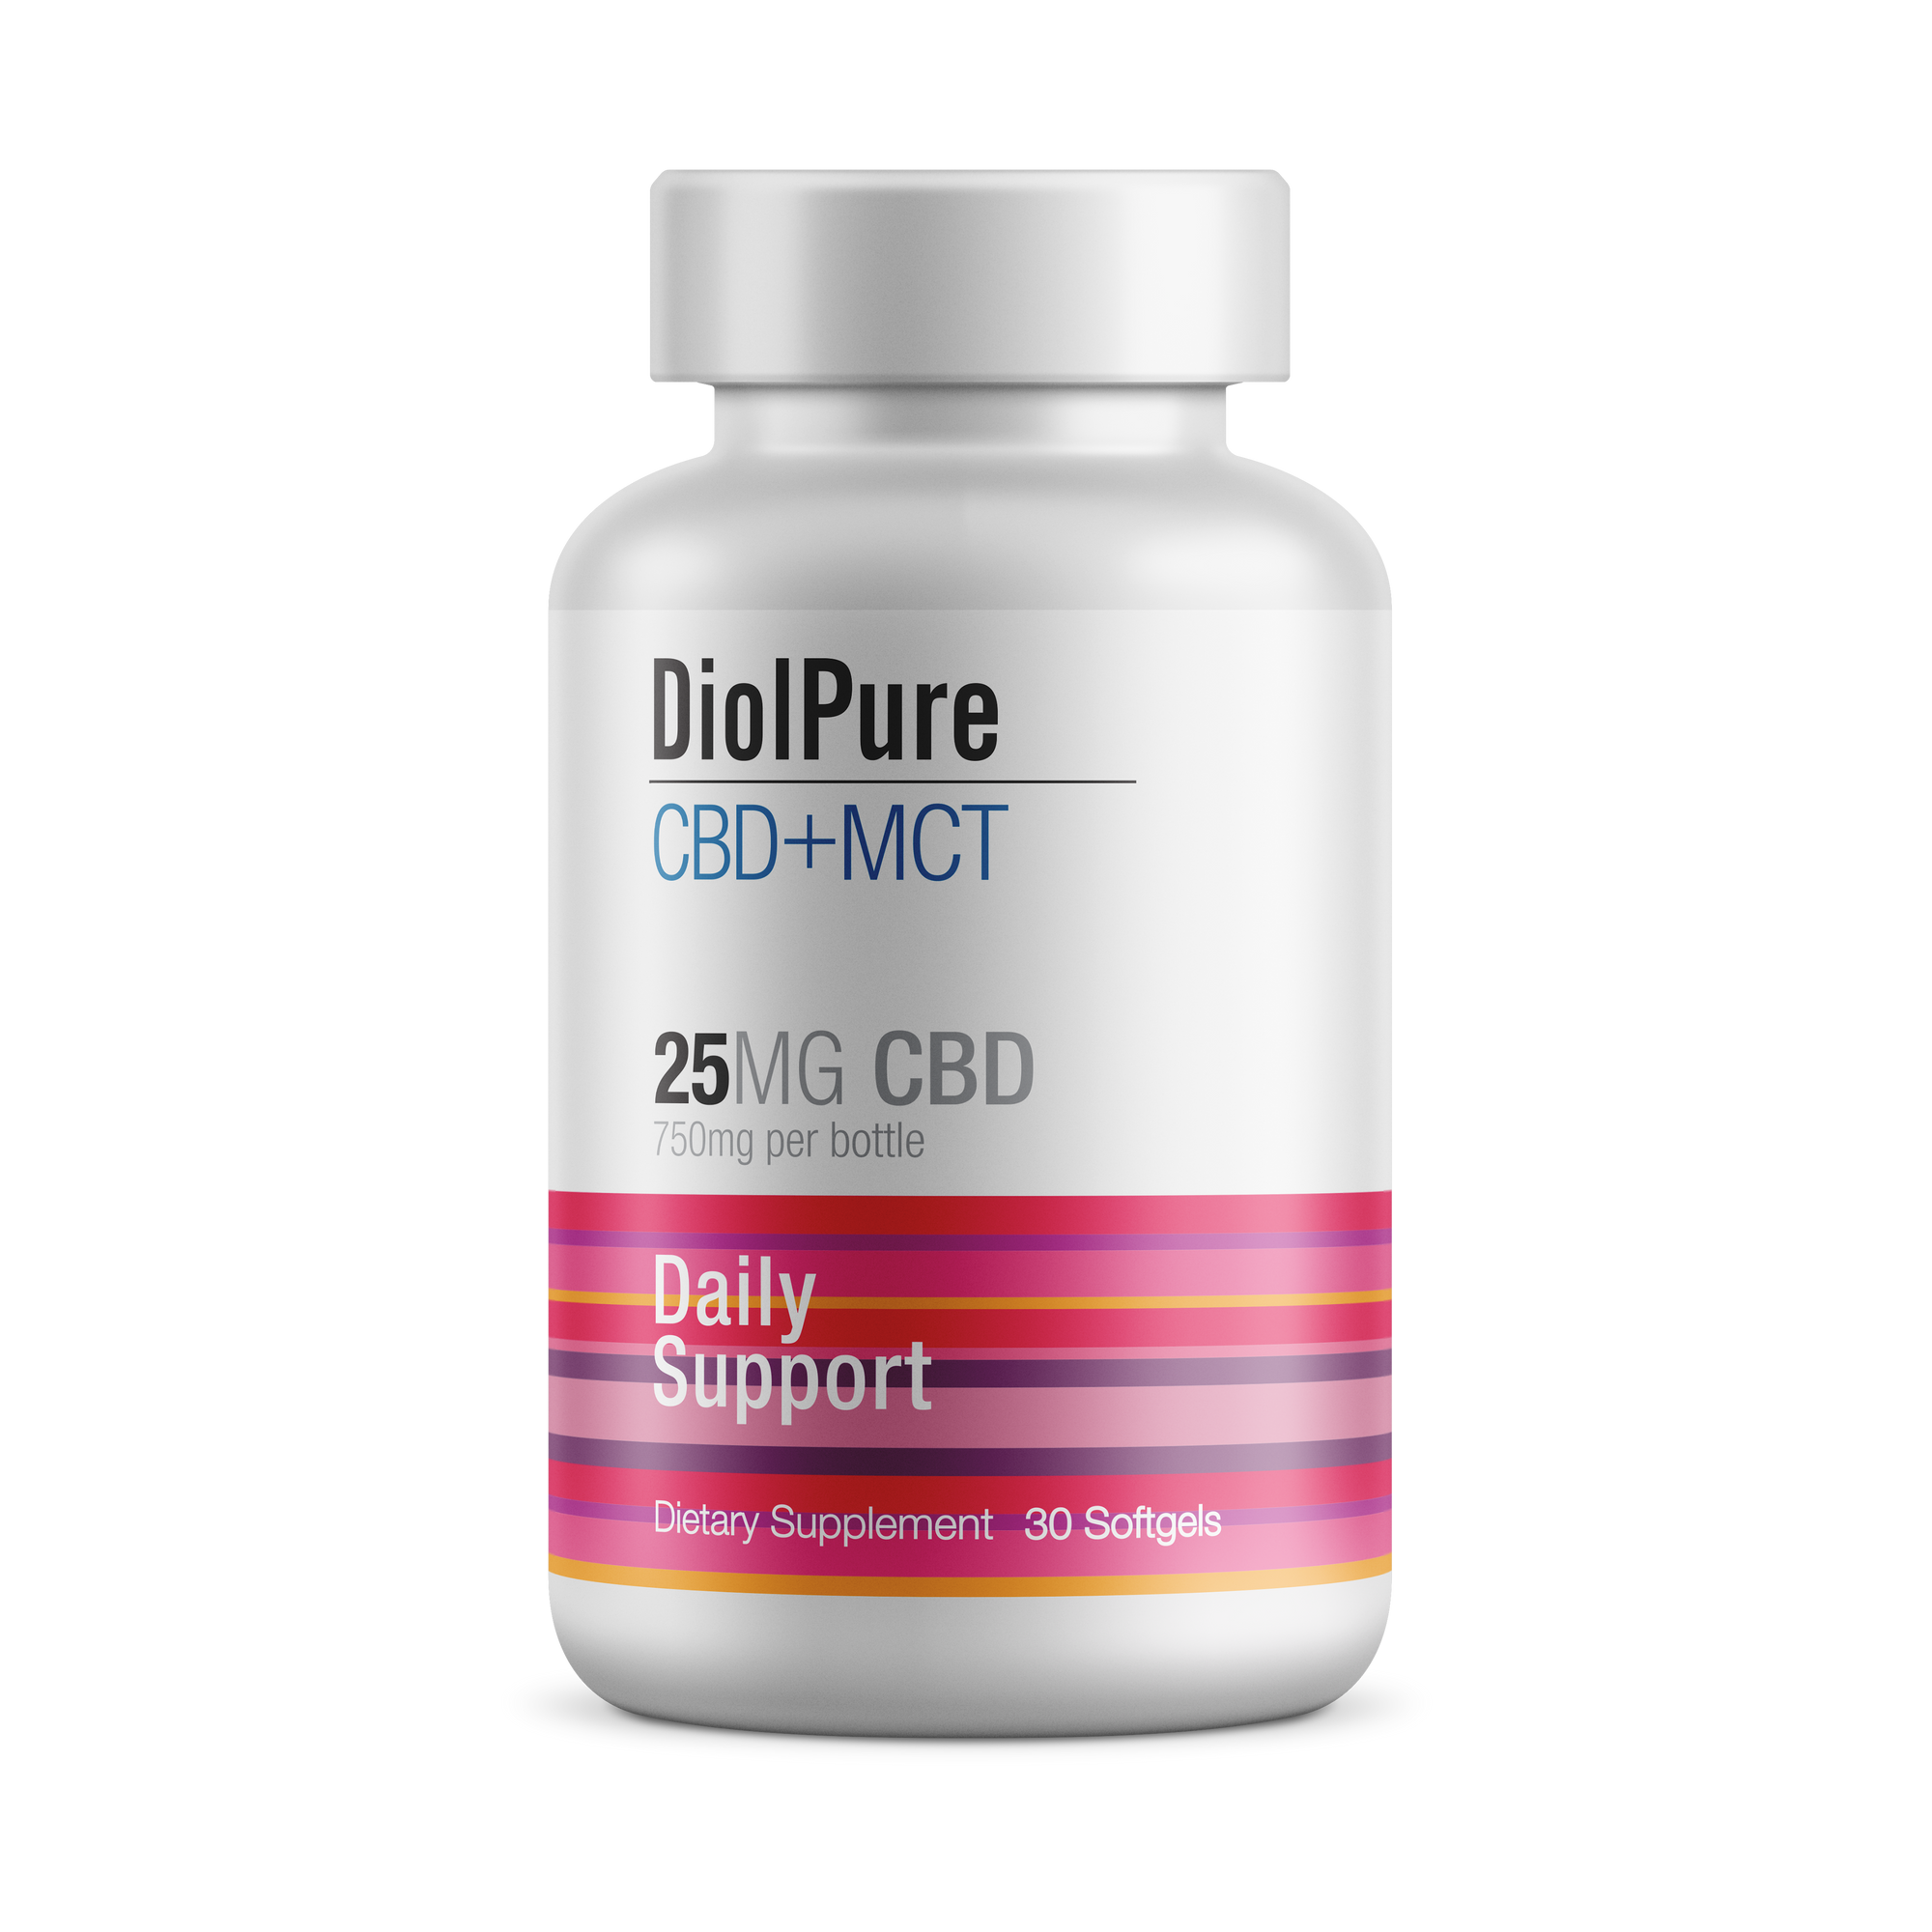 Buy Daily Support CBD Softgels capsules for daily health and wellness - Diolpure